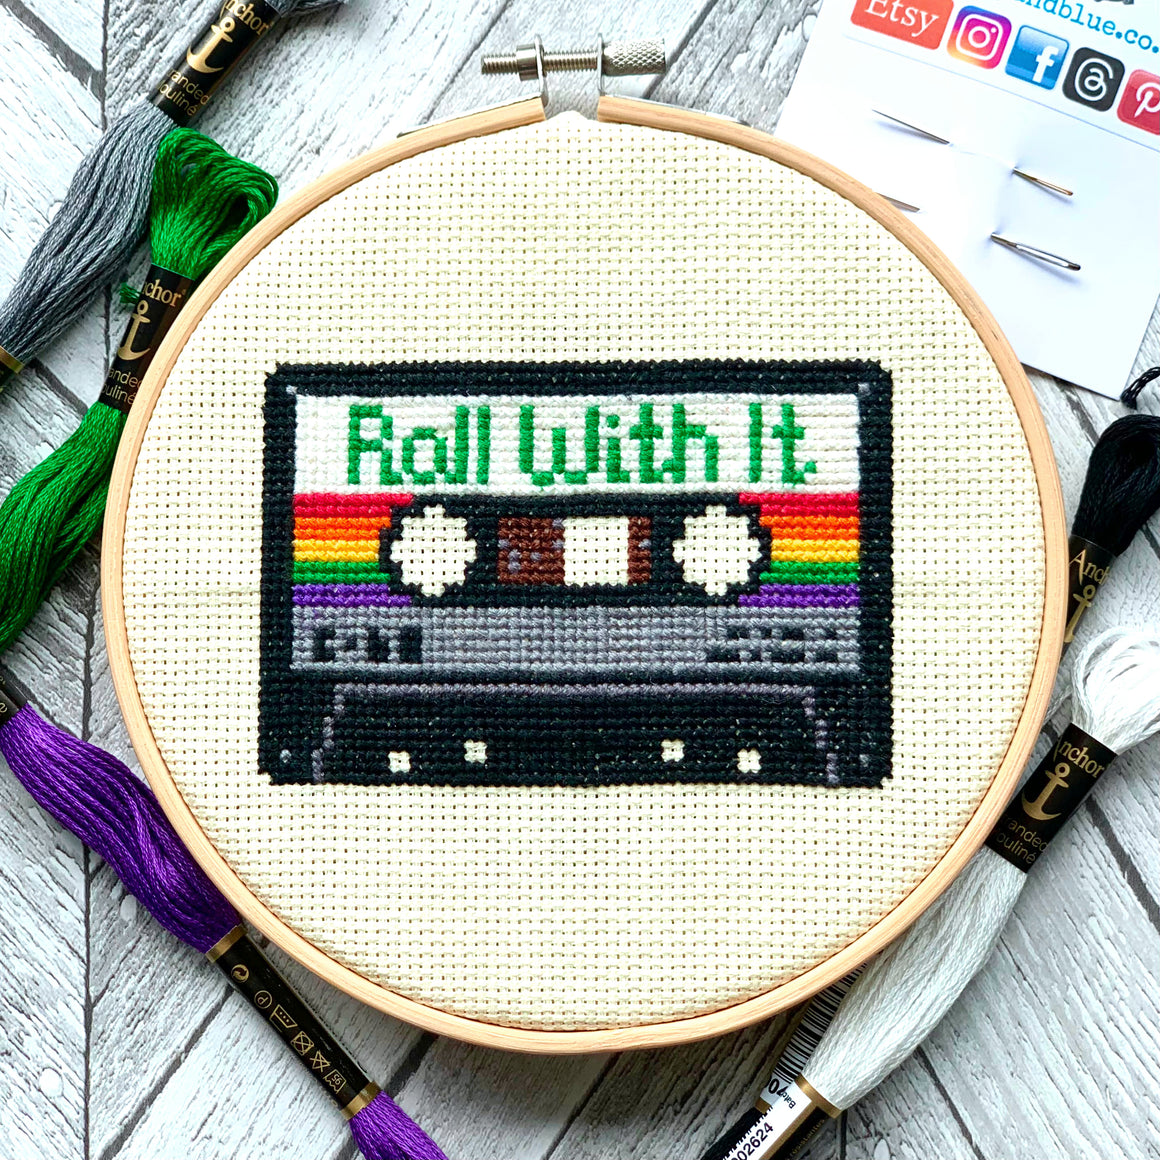 CROSS STITCH KIT - Roll With It (complete kit including 6" hoop)